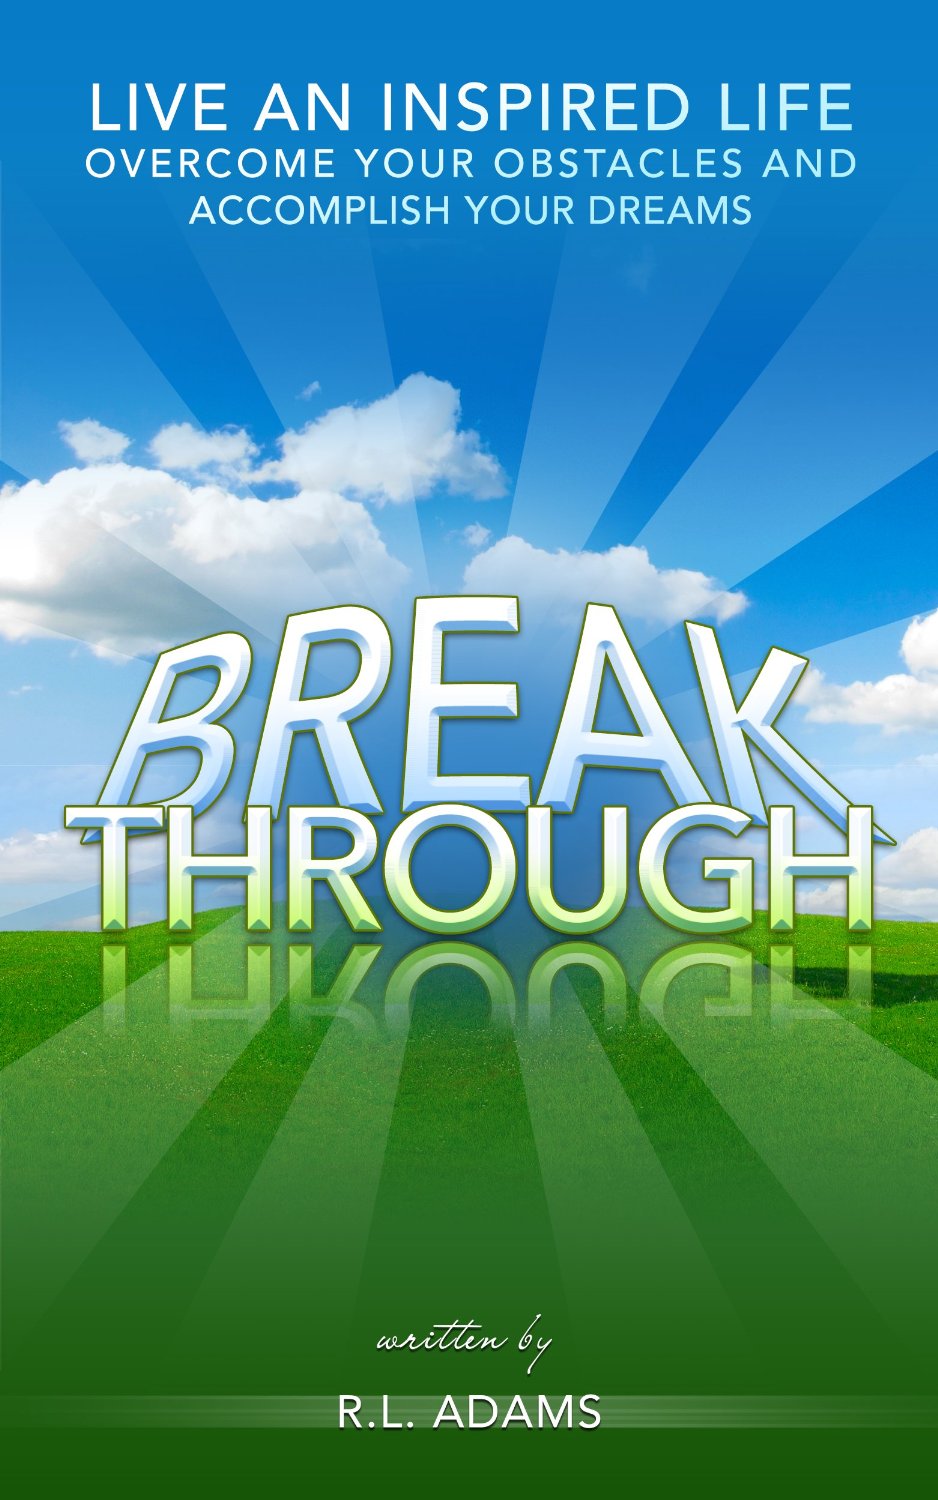 Breakthrough – Live an Inspired Life, Overcome your Obstacles and Accomplish your Dreams by R.L. Adams